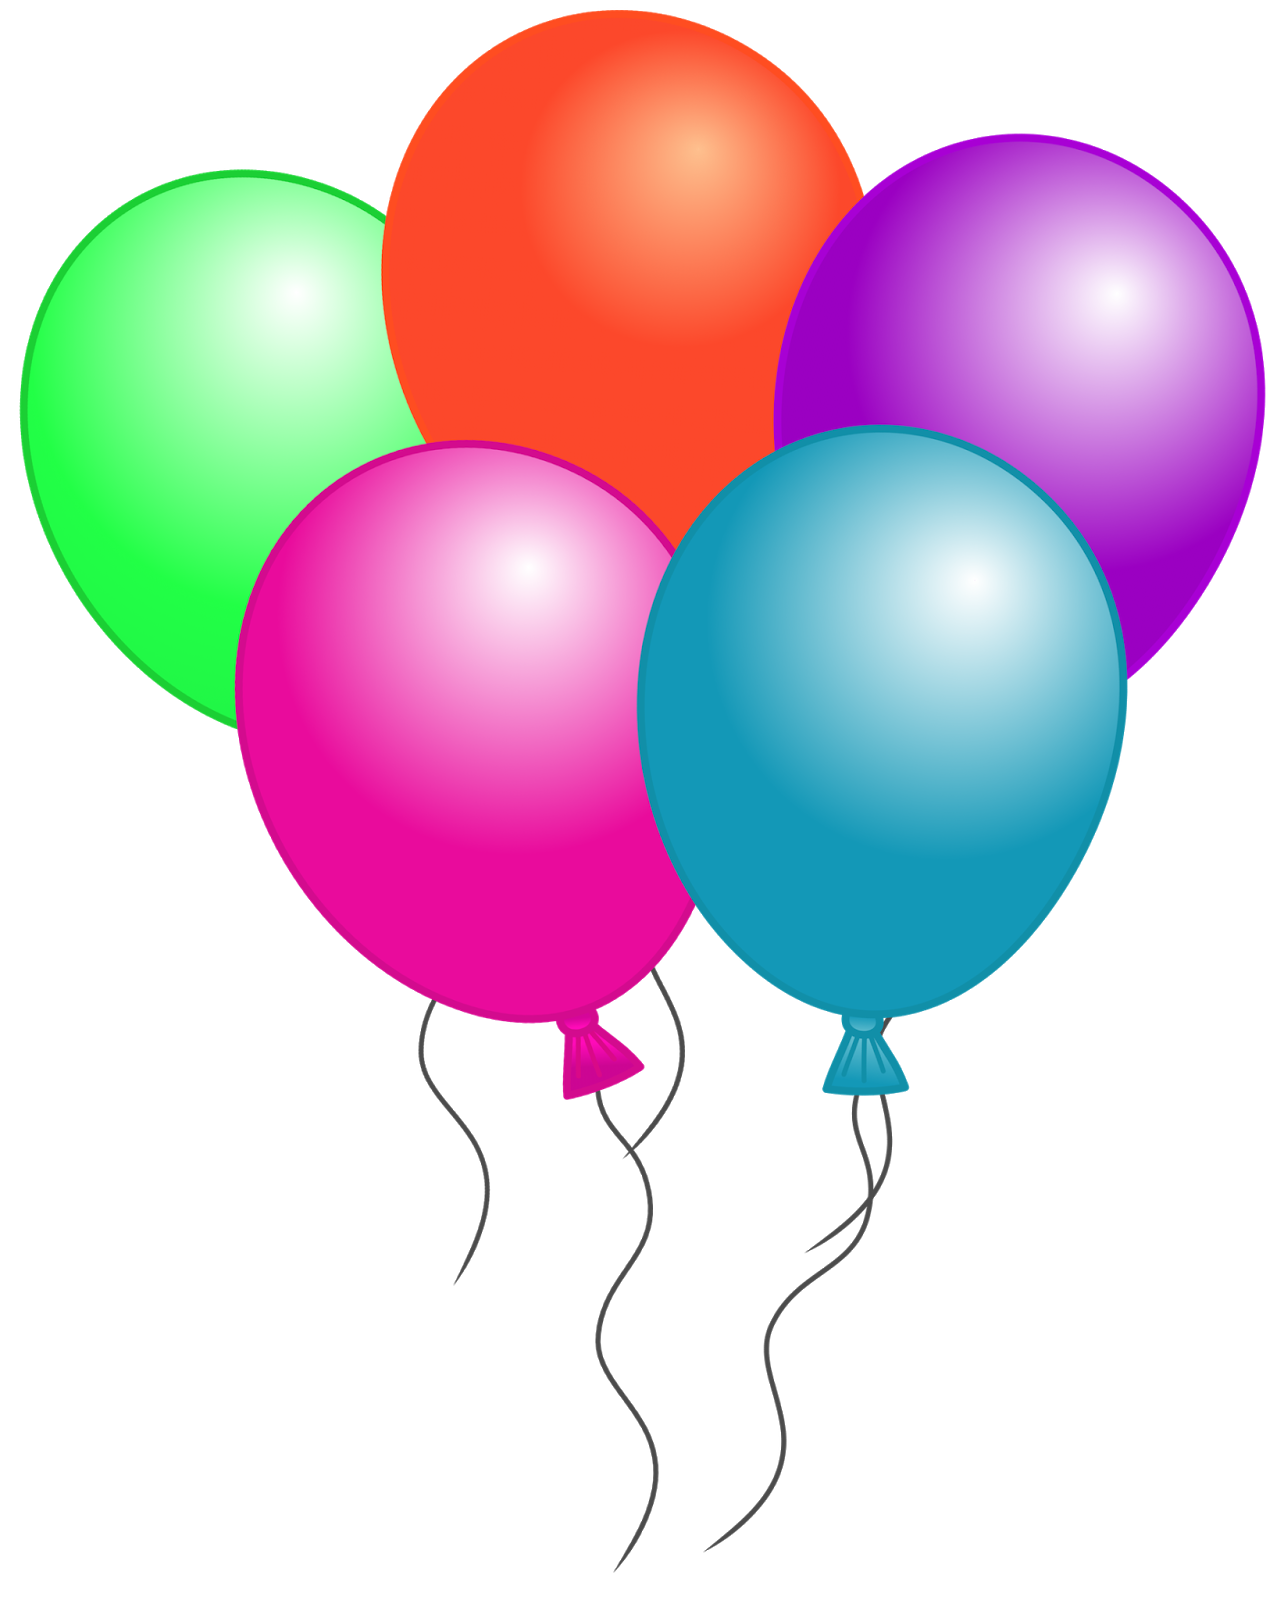 Ballons Png - Clipart library